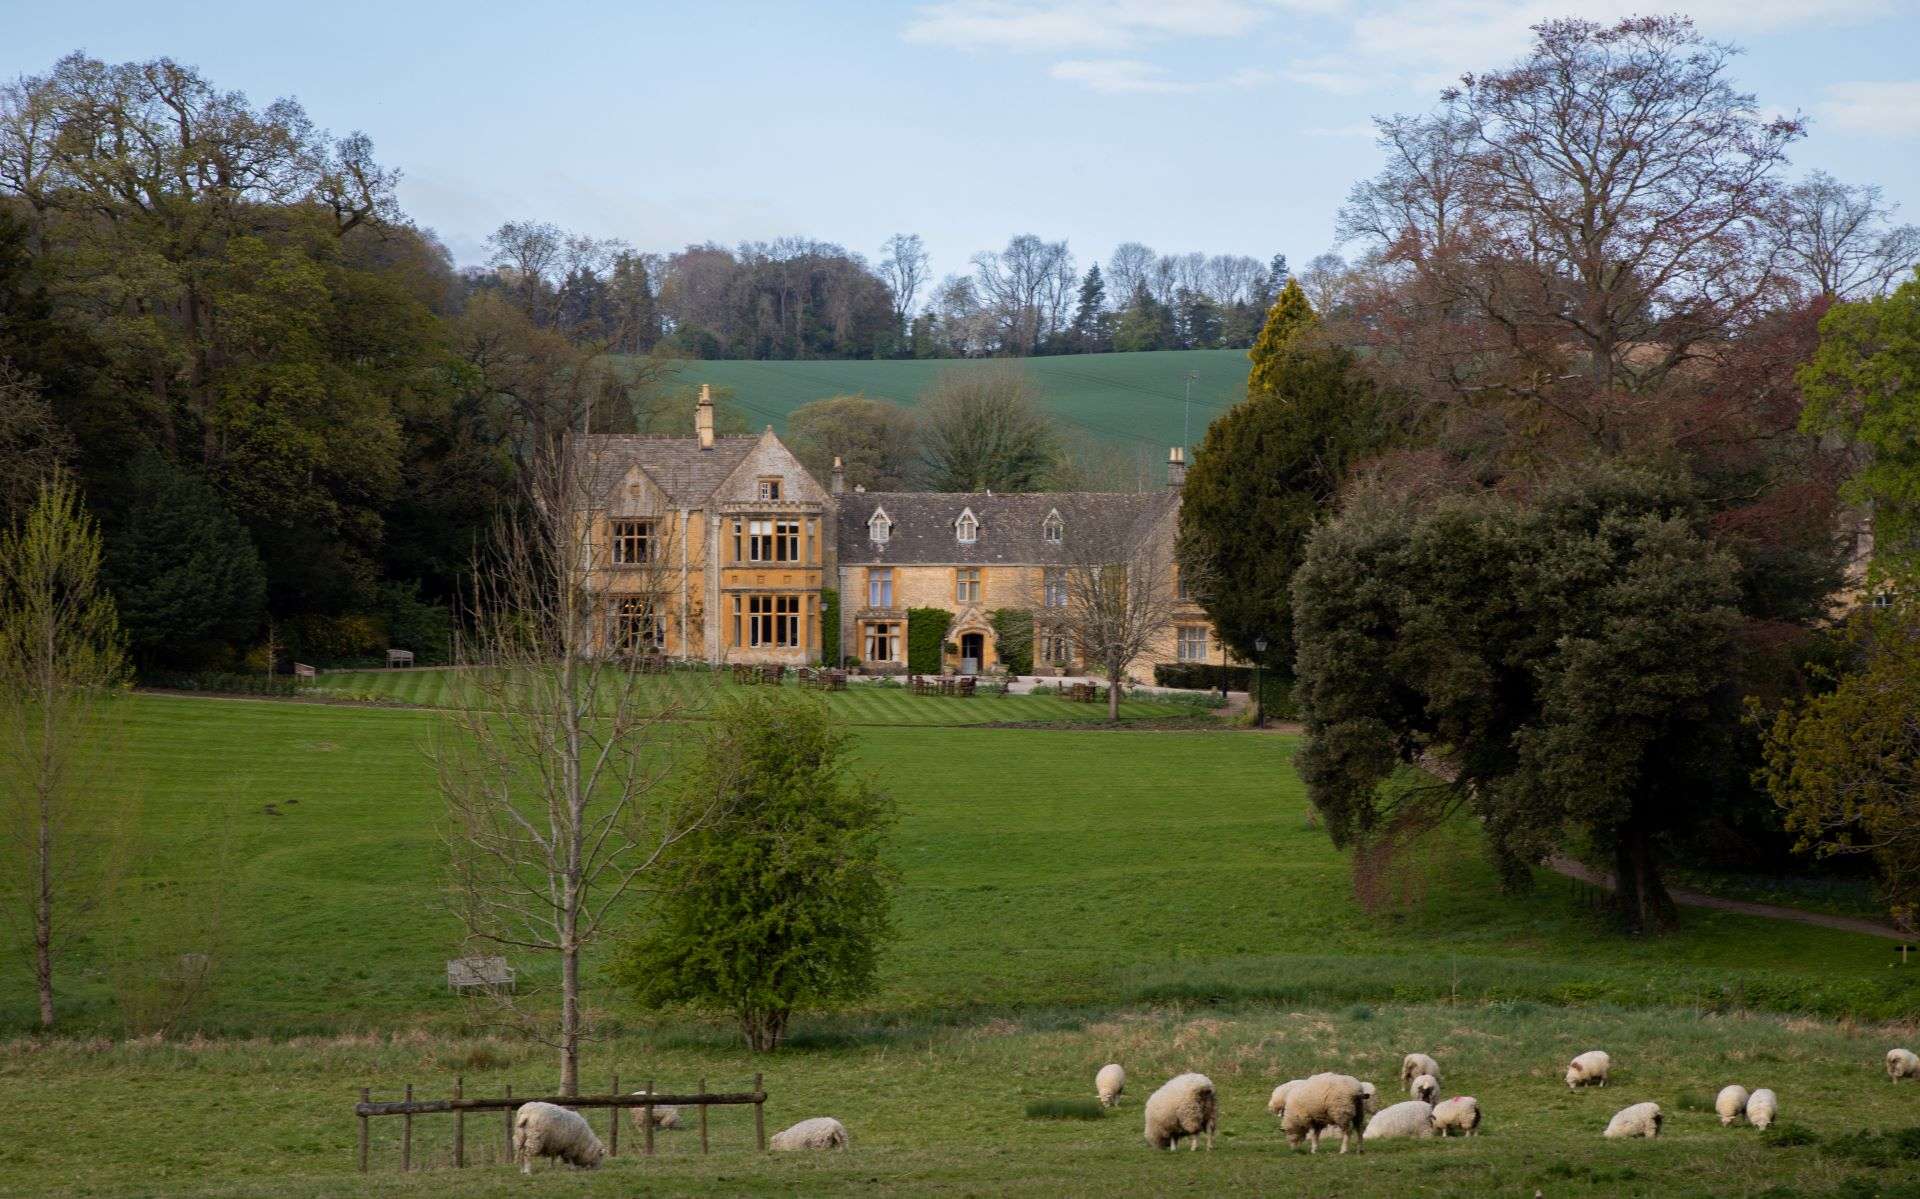 Sheep in front of a house in Cotswolds, England